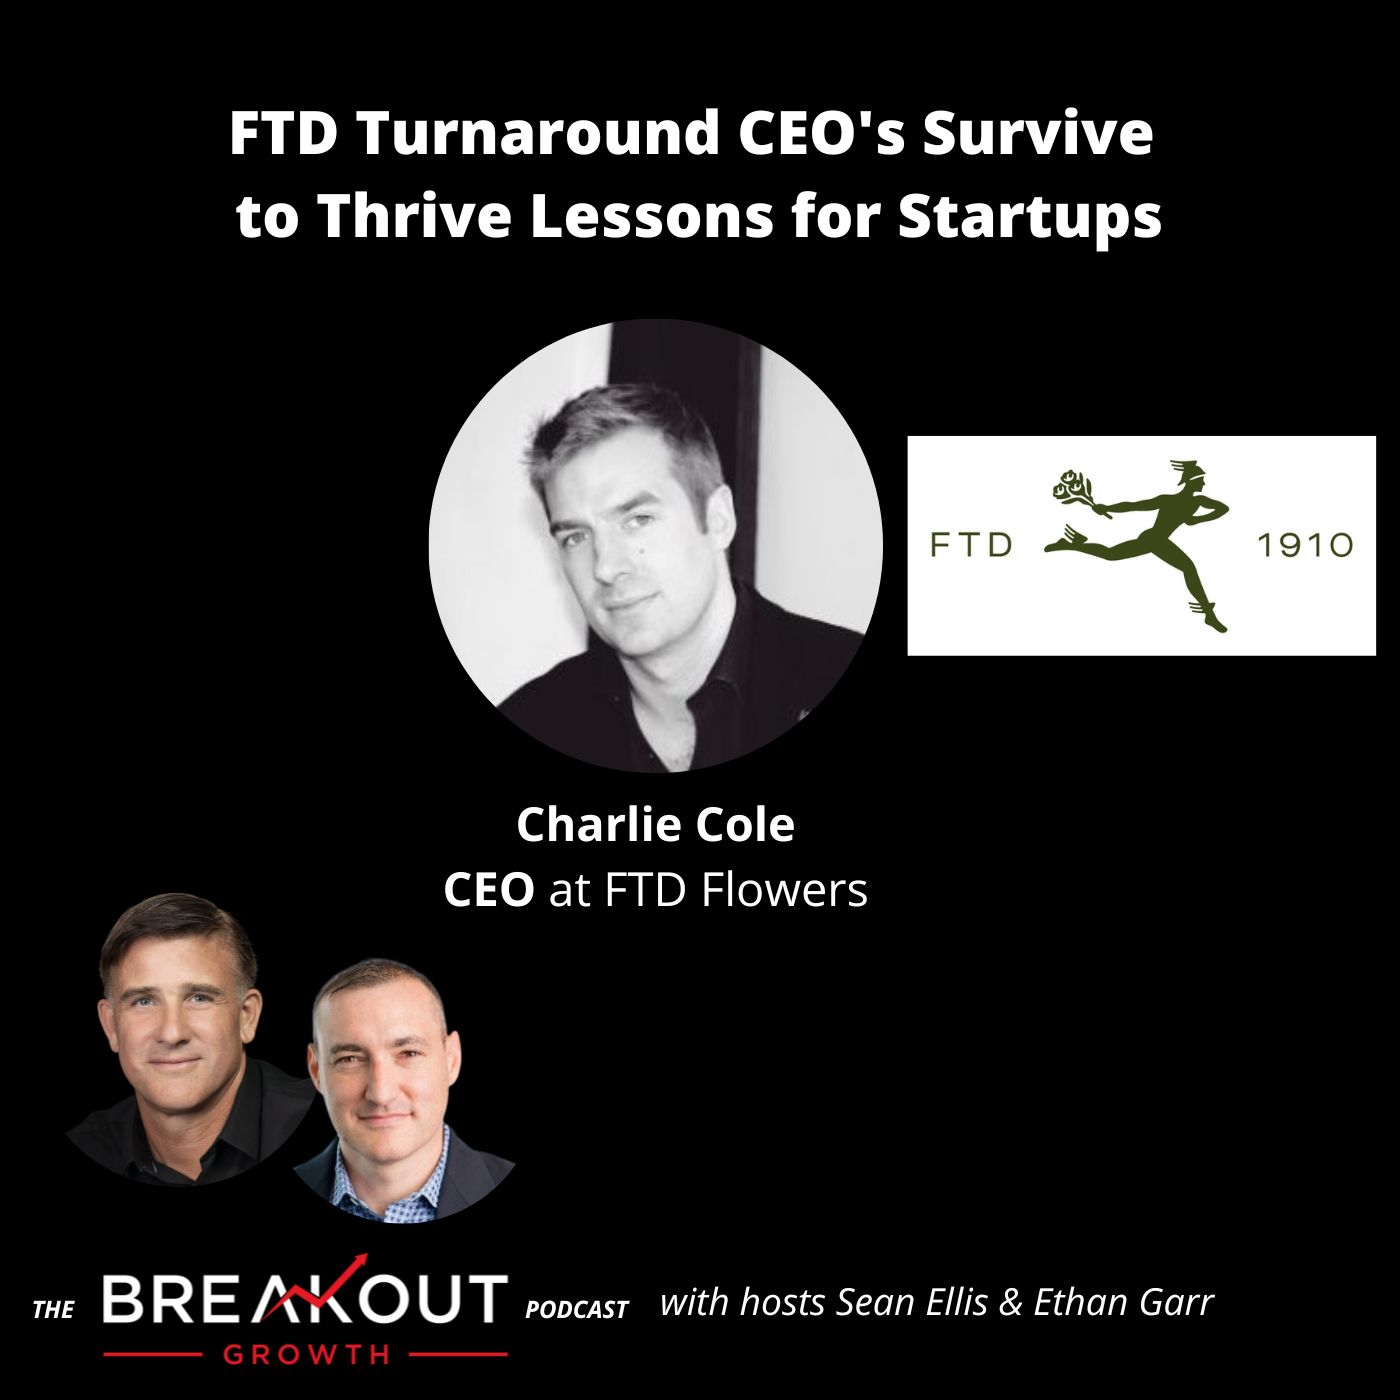 FTD Turnaround CEO's Survive to Thrive Lessons for Startups